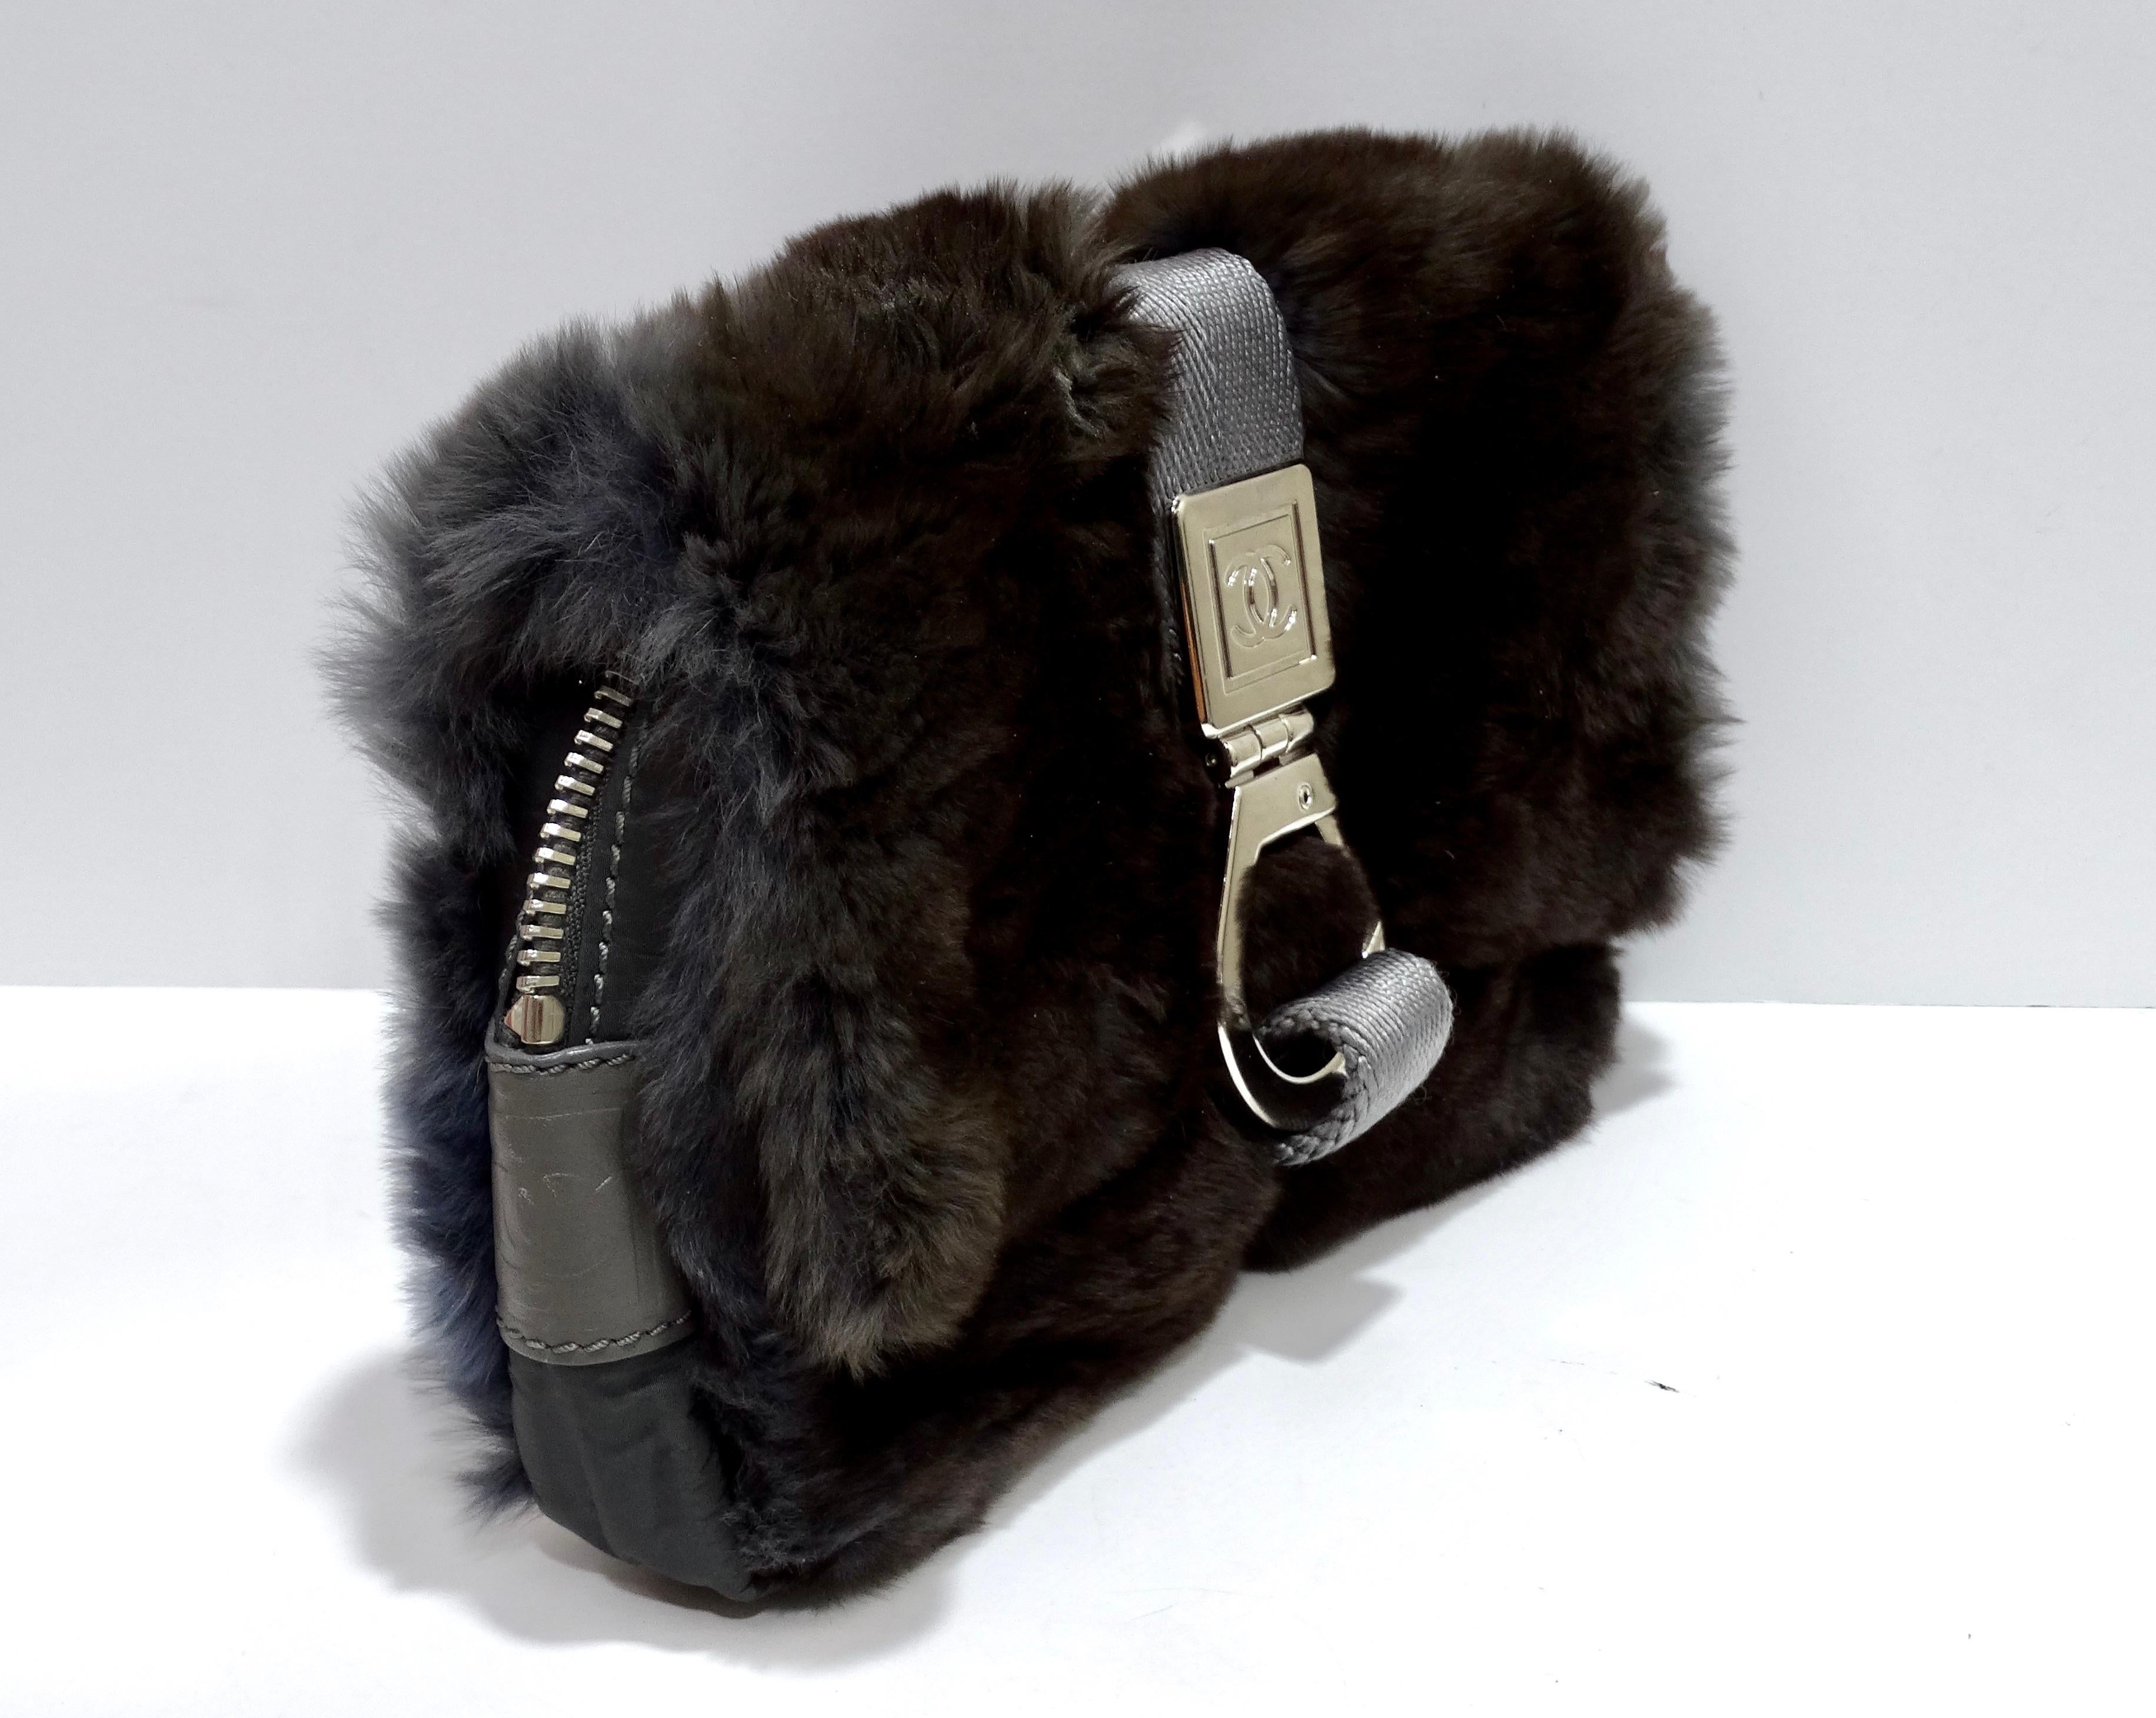 This is the most fabulous Chanel you'll come across! This bag will pair great with all your streetwear looks! A 2000's dream to say the least. This ultra-rare Chanel shoulder bag made of rabbit fur and was released as limited edition. The rabbit fur